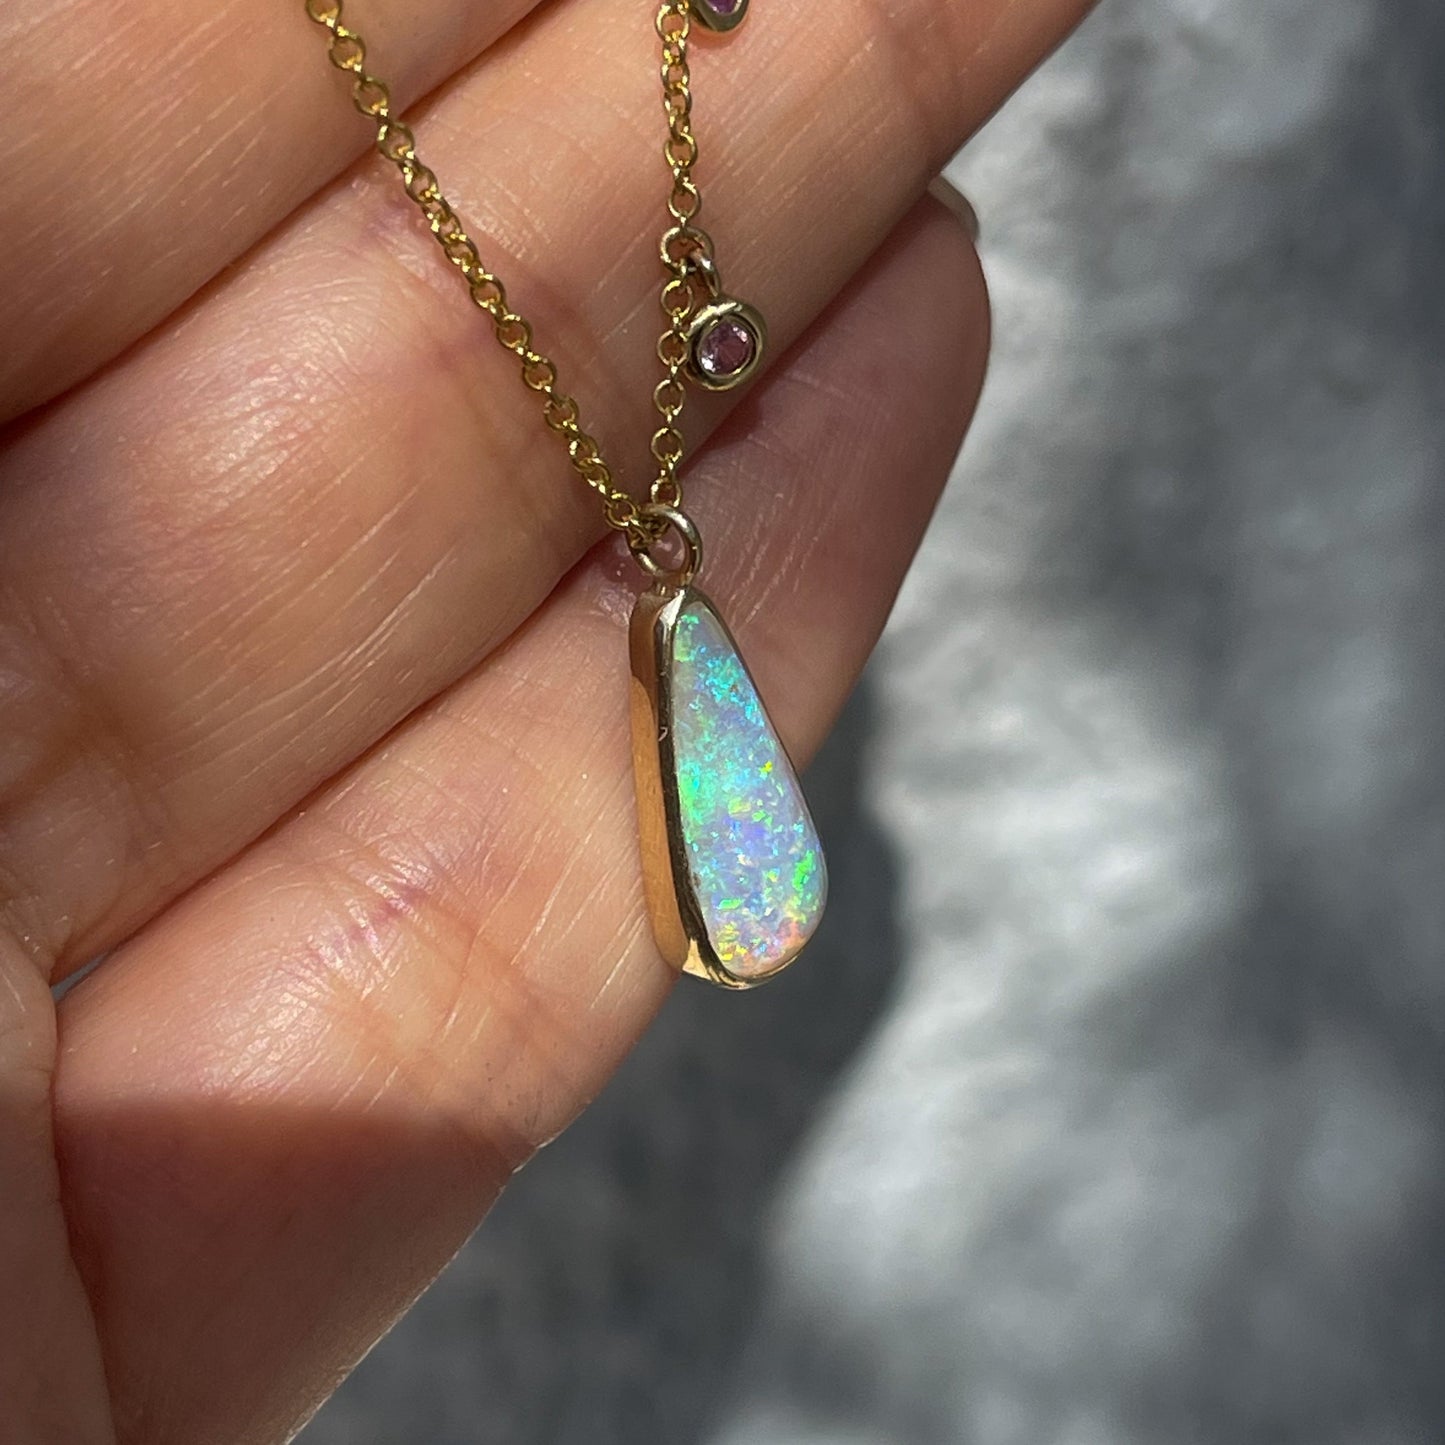 Australian Opal Necklace by NIXIN Jewelry shown at angle. Gold opal necklace.